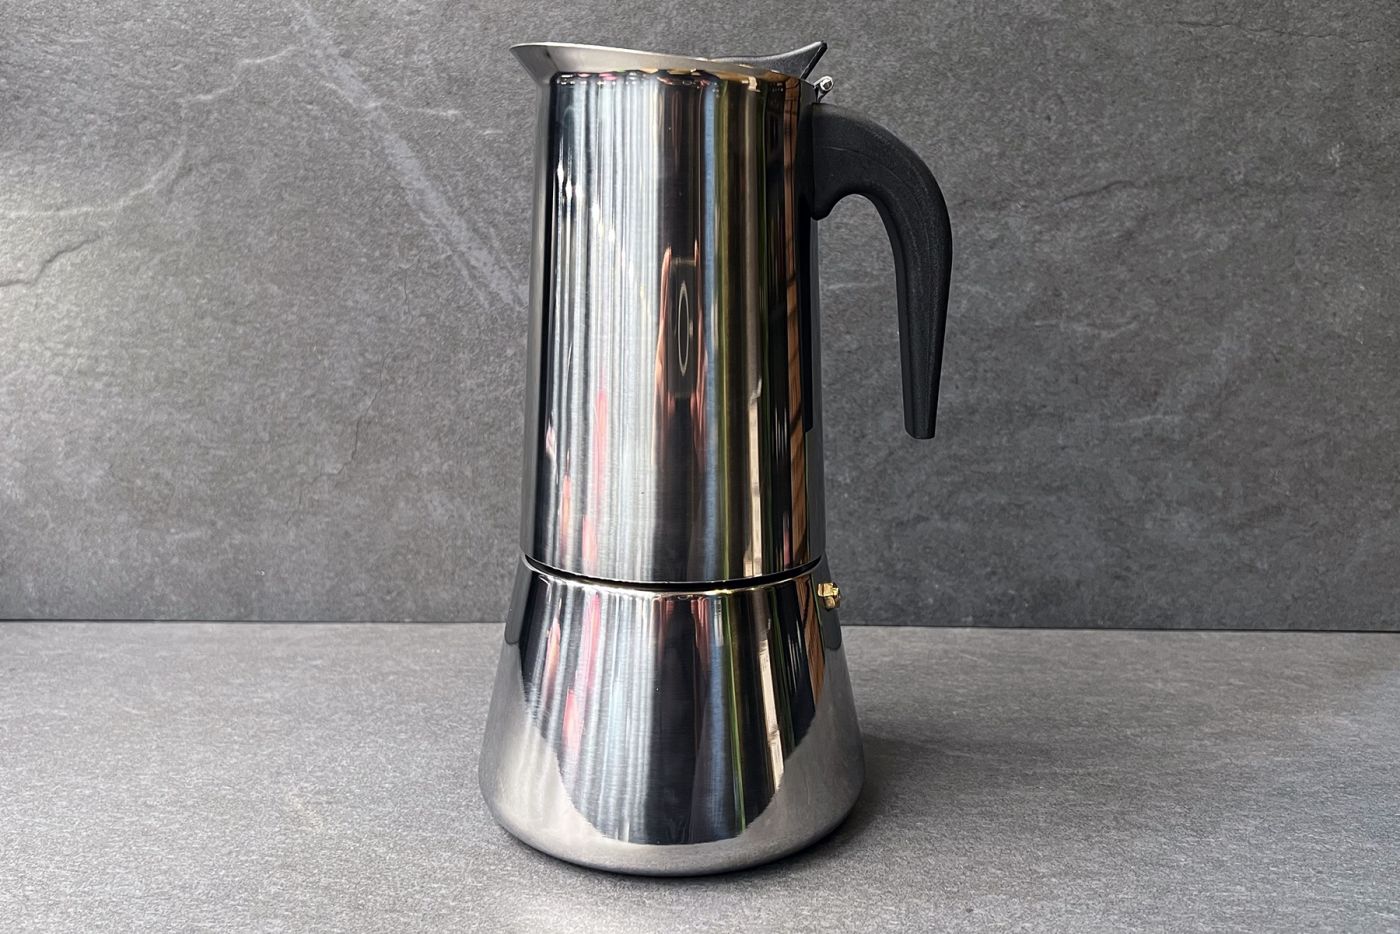 Moka Stainless Steel Espresso Maker 15-Cup